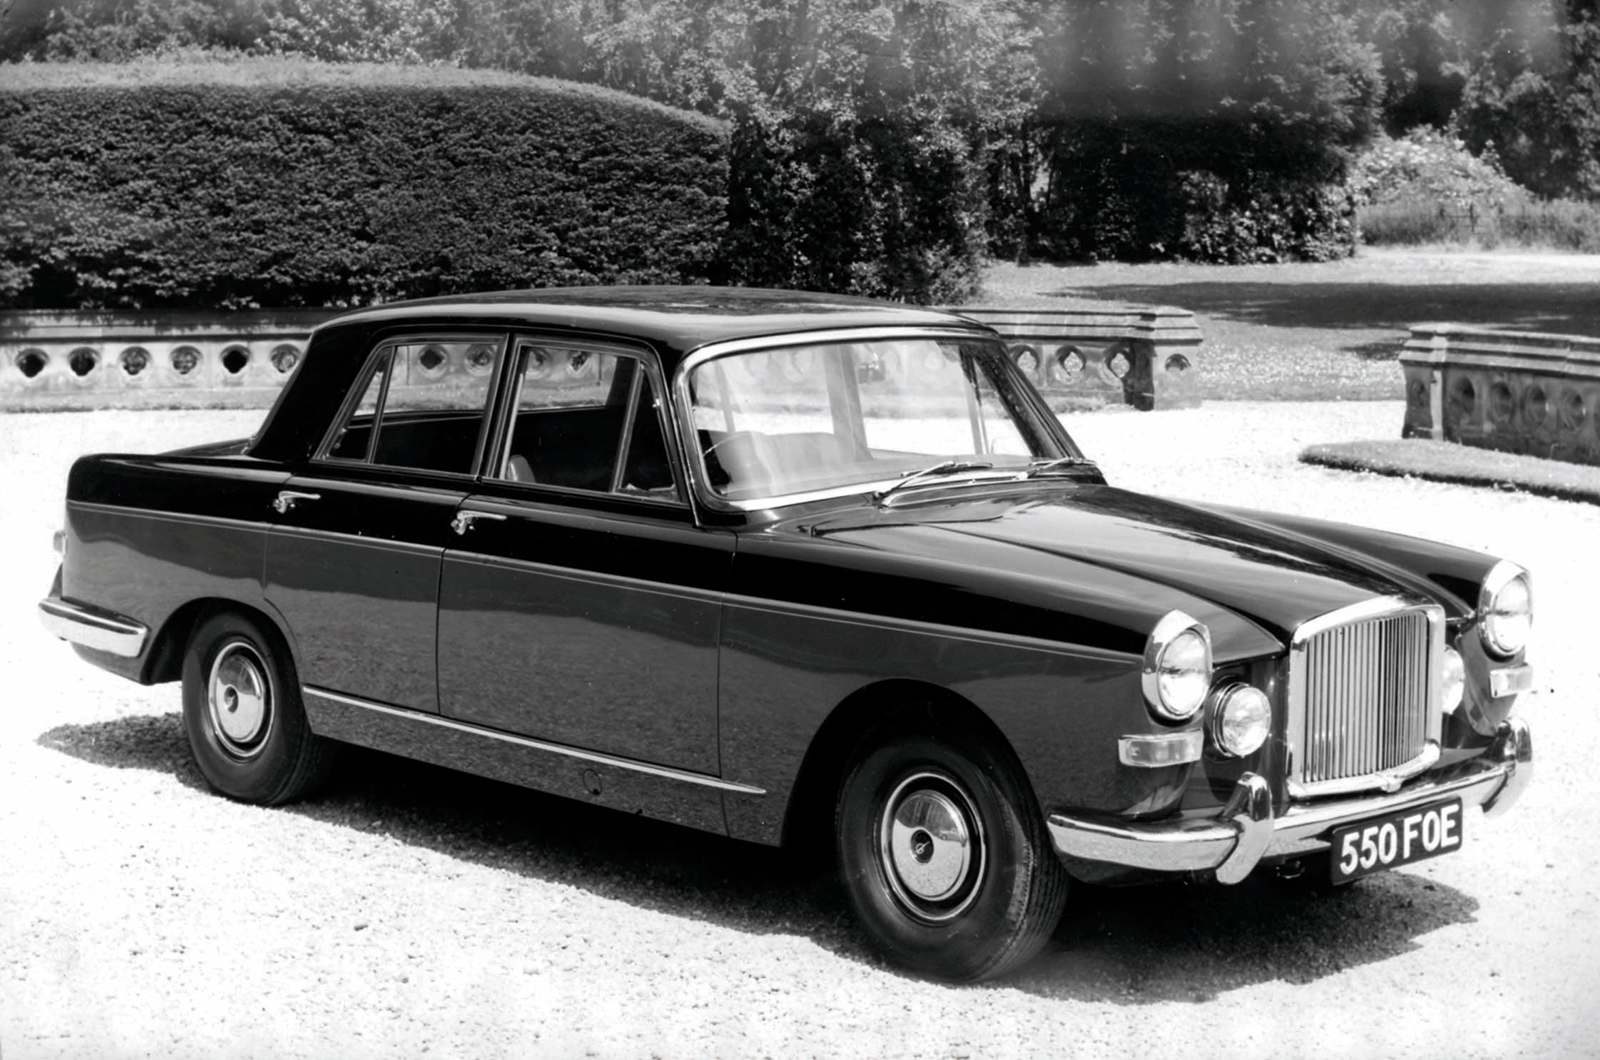 Classic & Sports Car – Buyer’s guide: Jaguar 420 and Daimler Sovereign